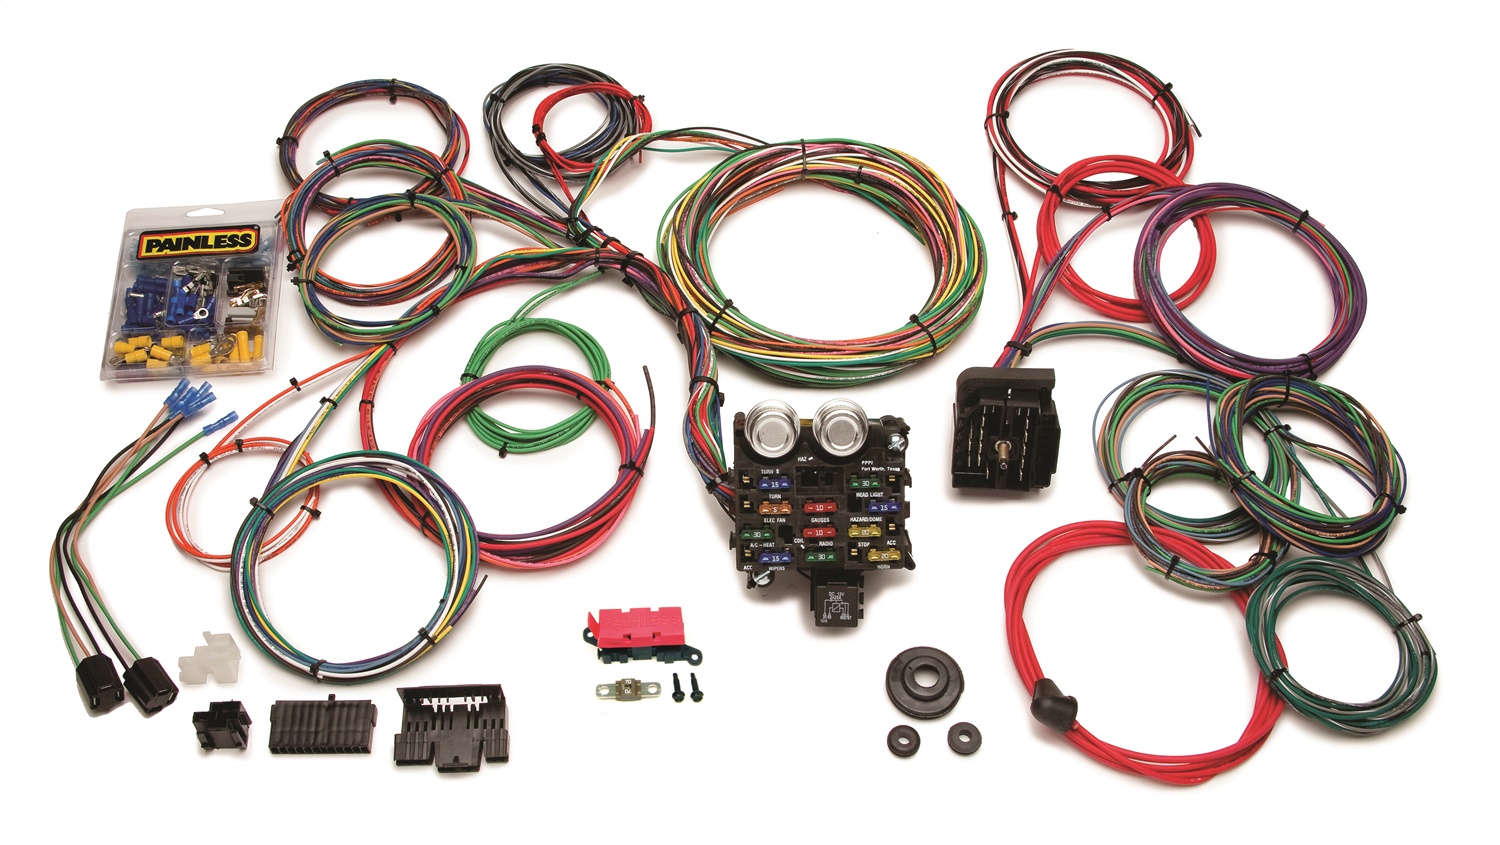 Painless Wiring Painless Wiring 20103 21 Circuit Classic Customizable Muscle Car Harness